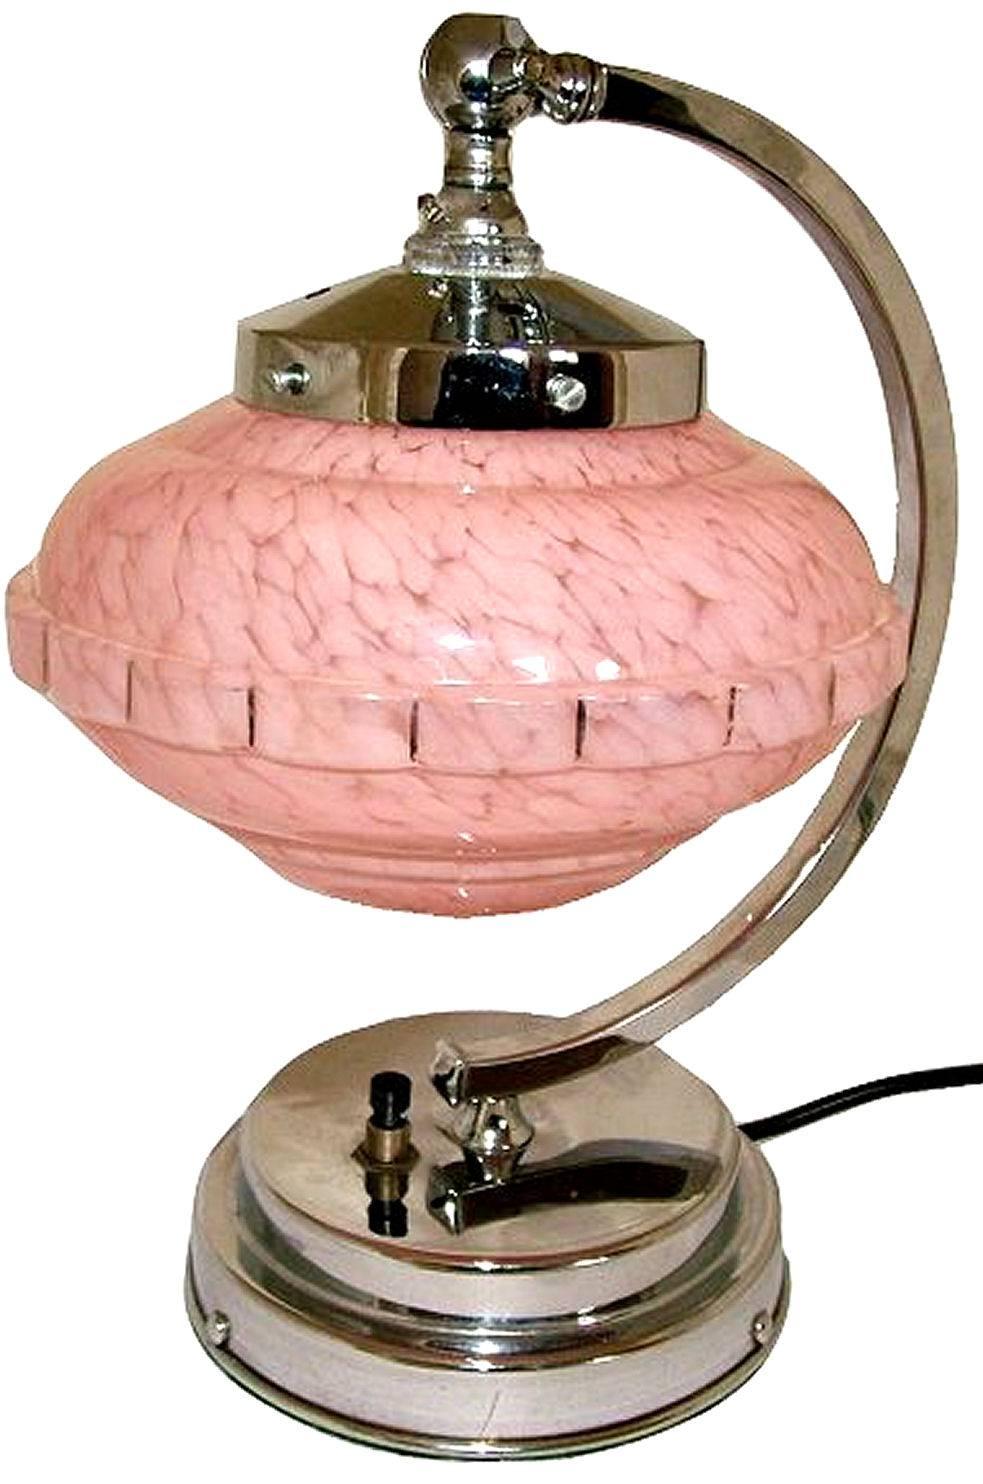 Original 1930's Art Deco large Angle poise table light in great period working condition in chrome. This light just screams Art Deco with its stepped base and pink marble effect glass shade, a real iconic gem. The shade can be rotated to be